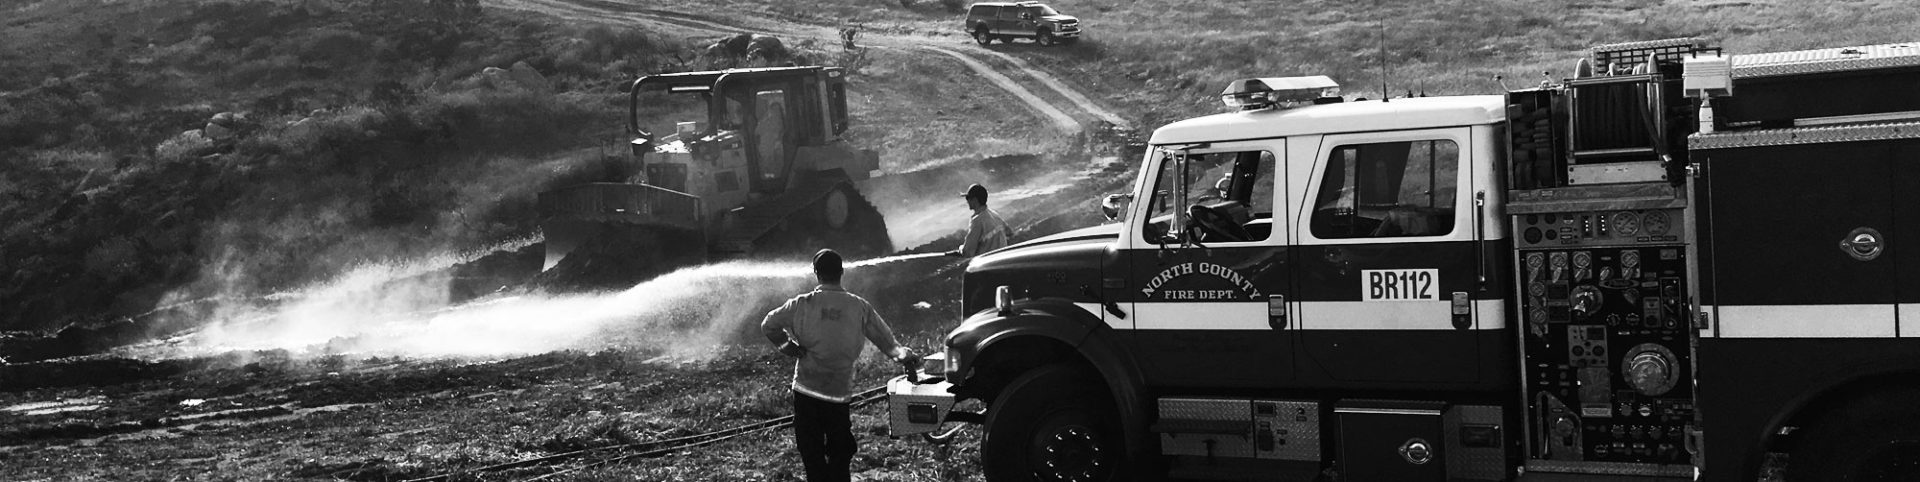 North Country fire trucks hose down dirt roads with the help of tractor